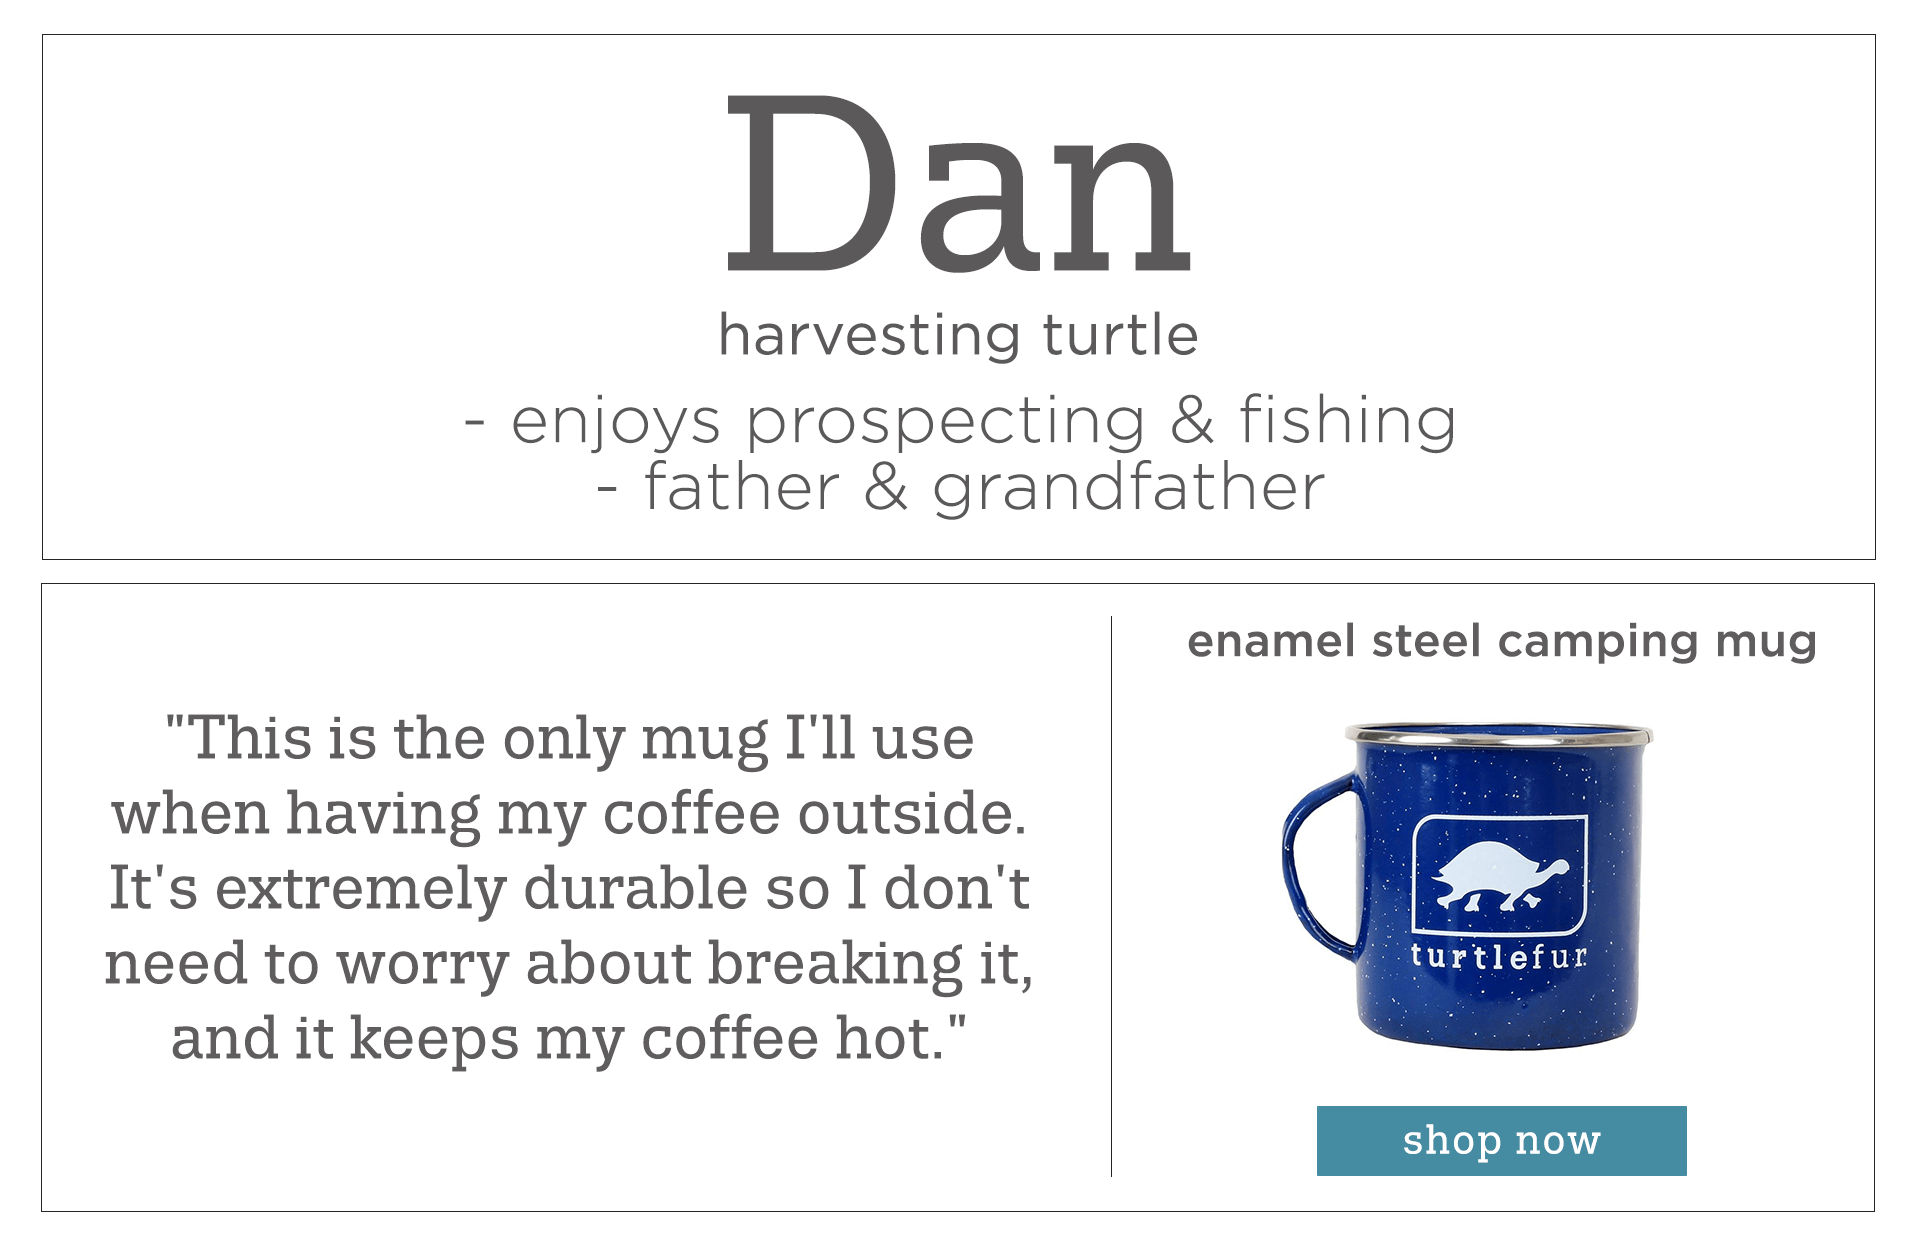 Enamel steel mug that is durable and lightweight, a perfect mug for camping and hiking